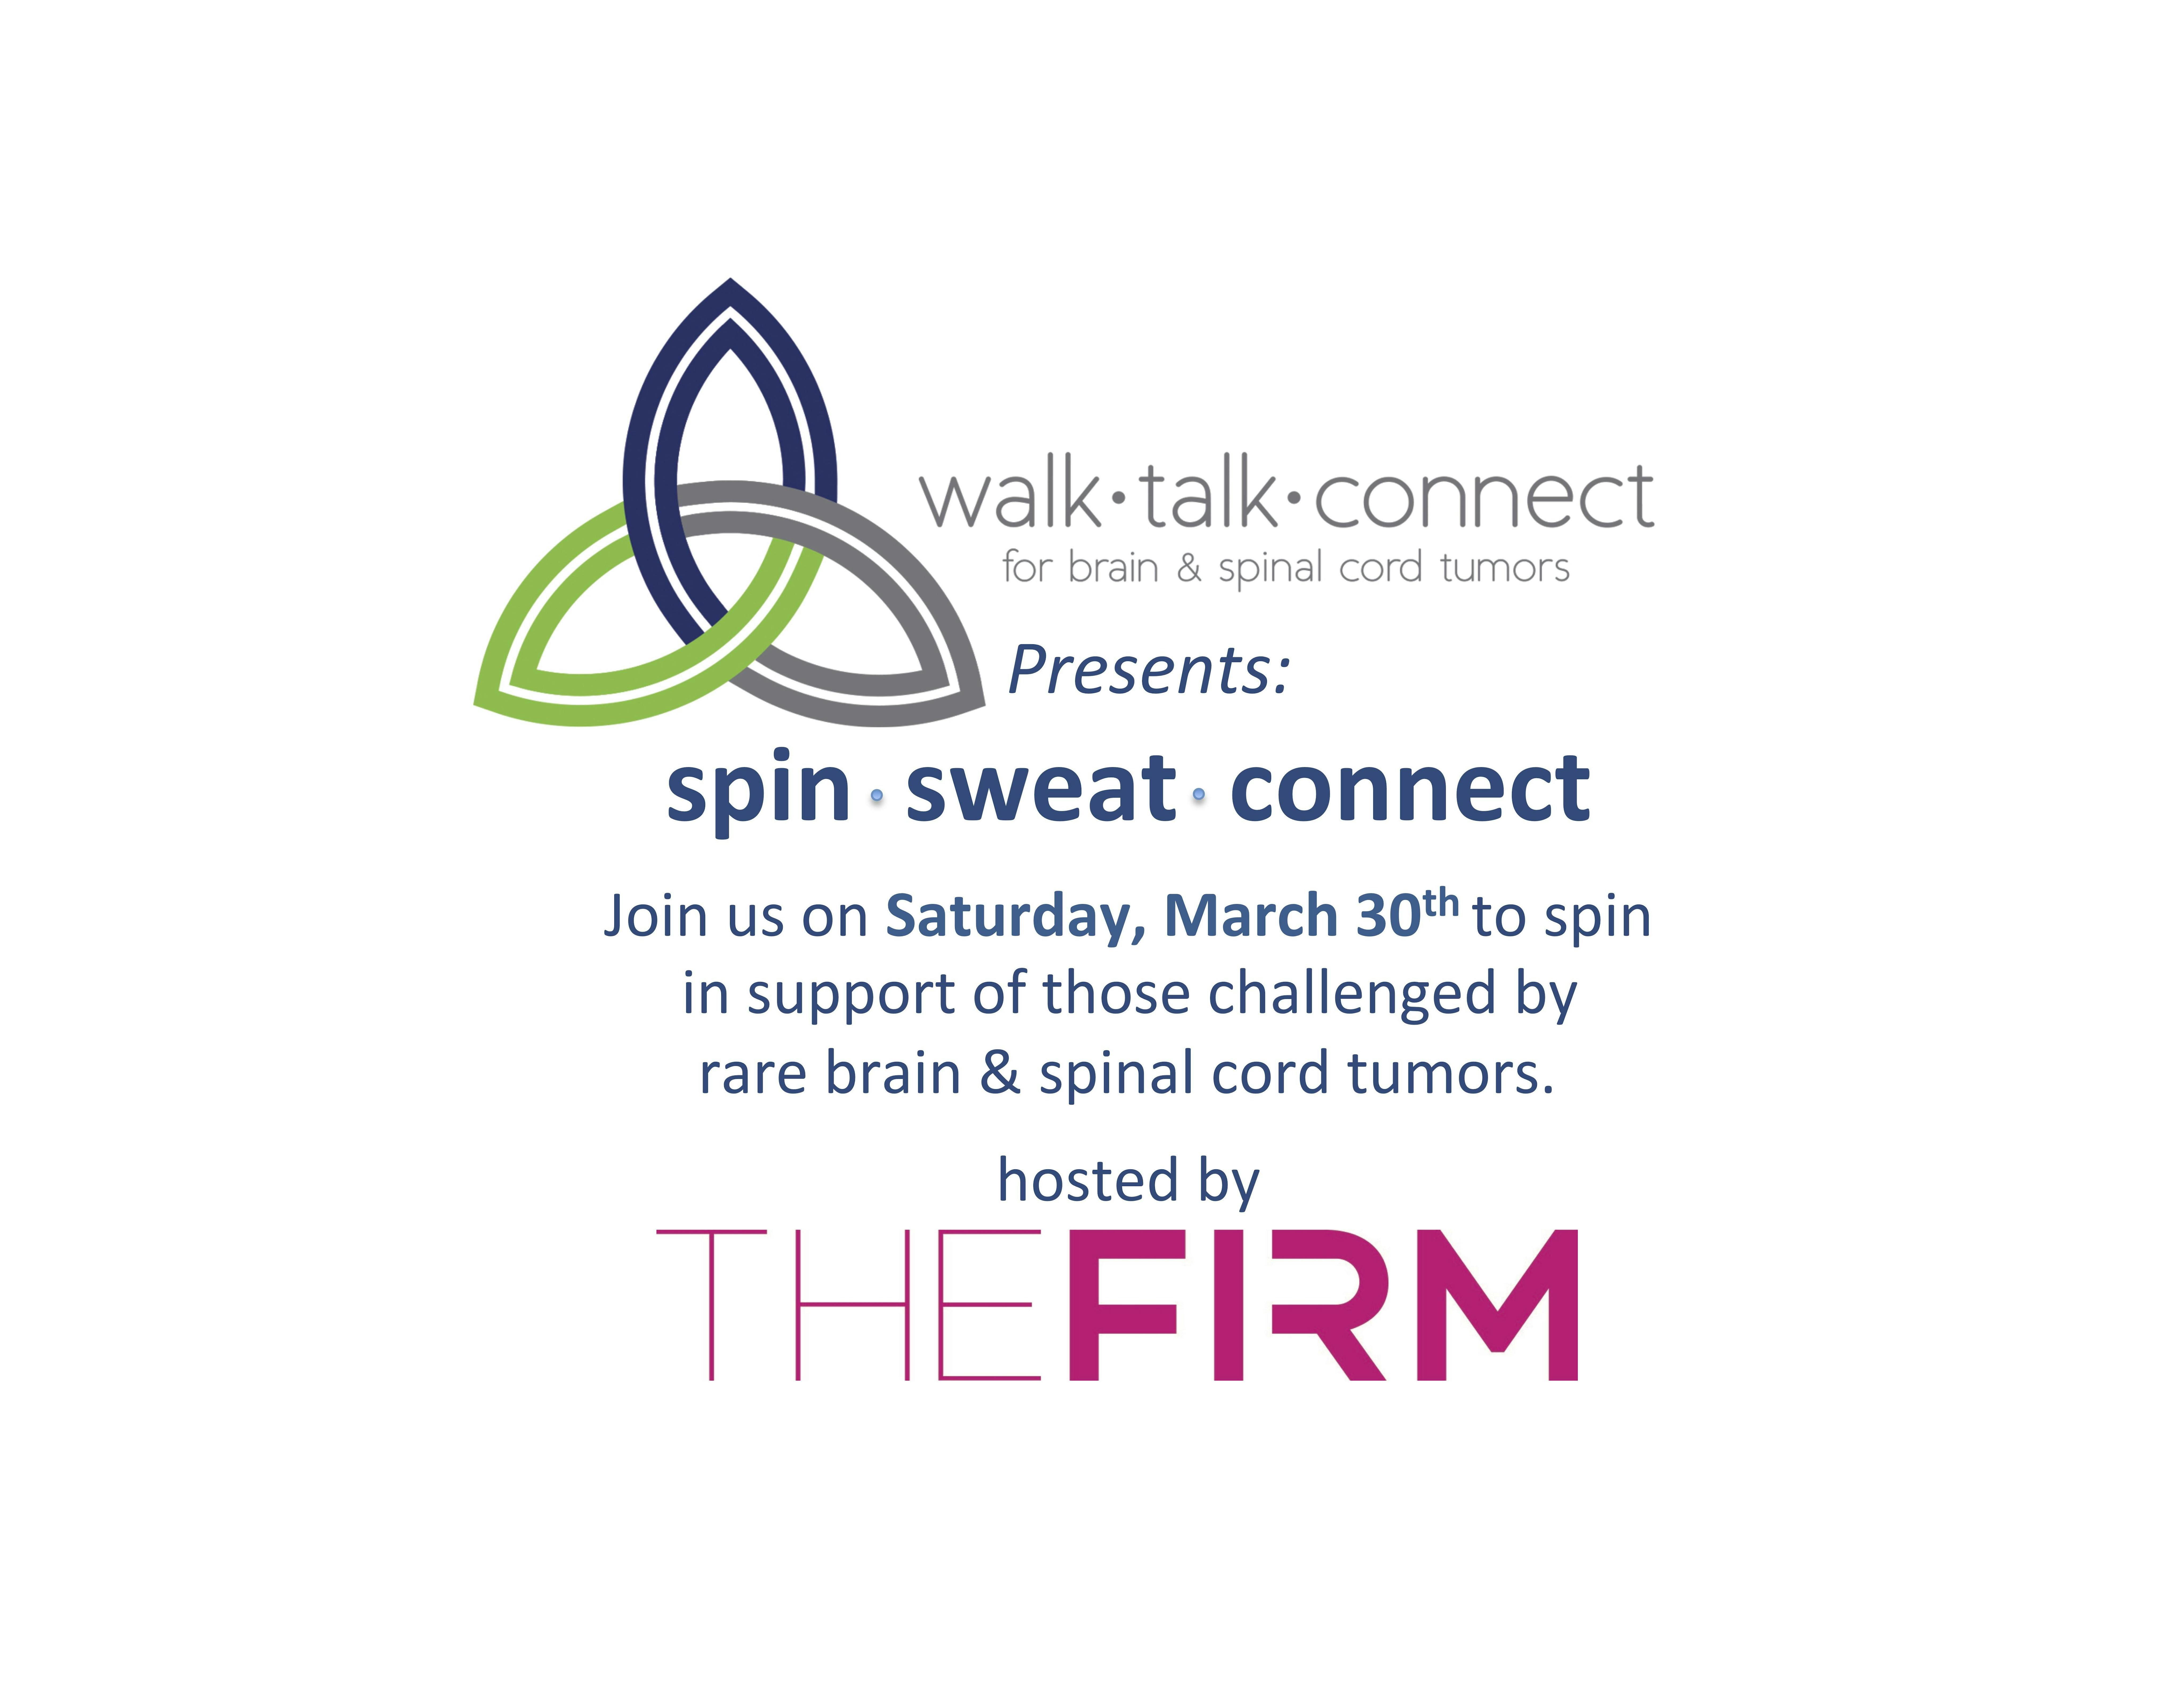 SpinSweatConnect